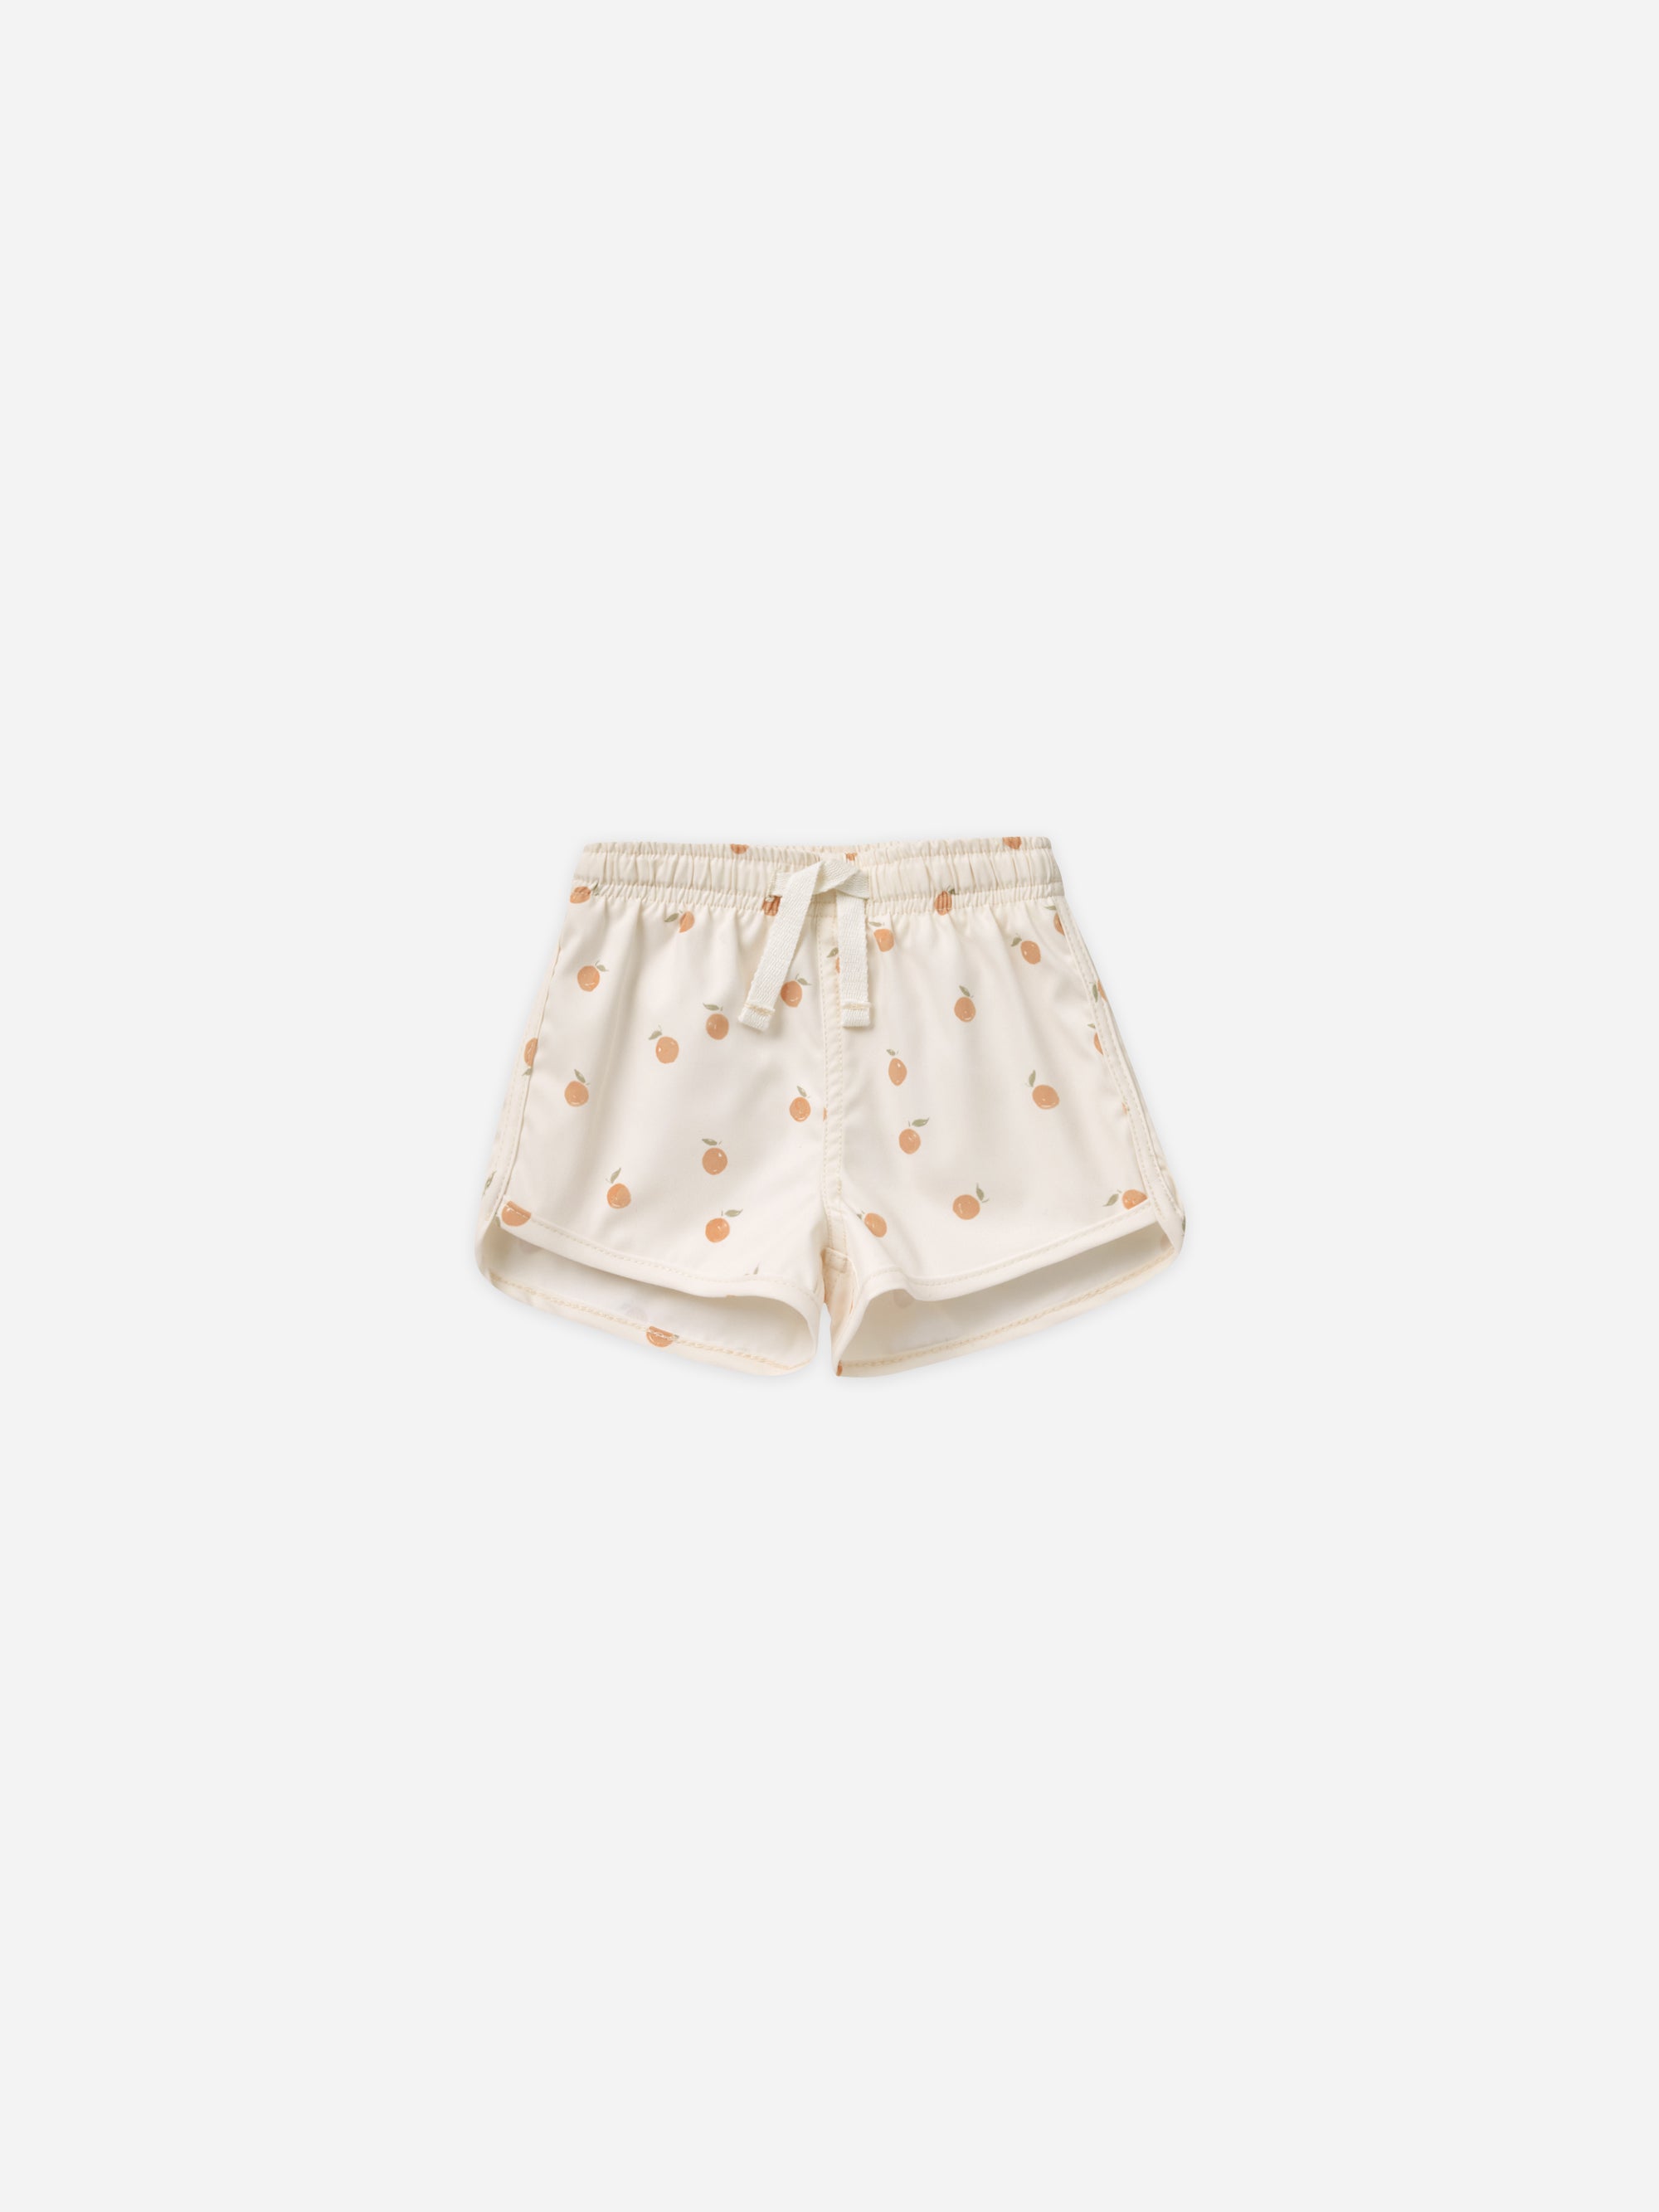 Boys Swim Short || Oranges - Rylee + Cru | Kids Clothes | Trendy Baby Clothes | Modern Infant Outfits |